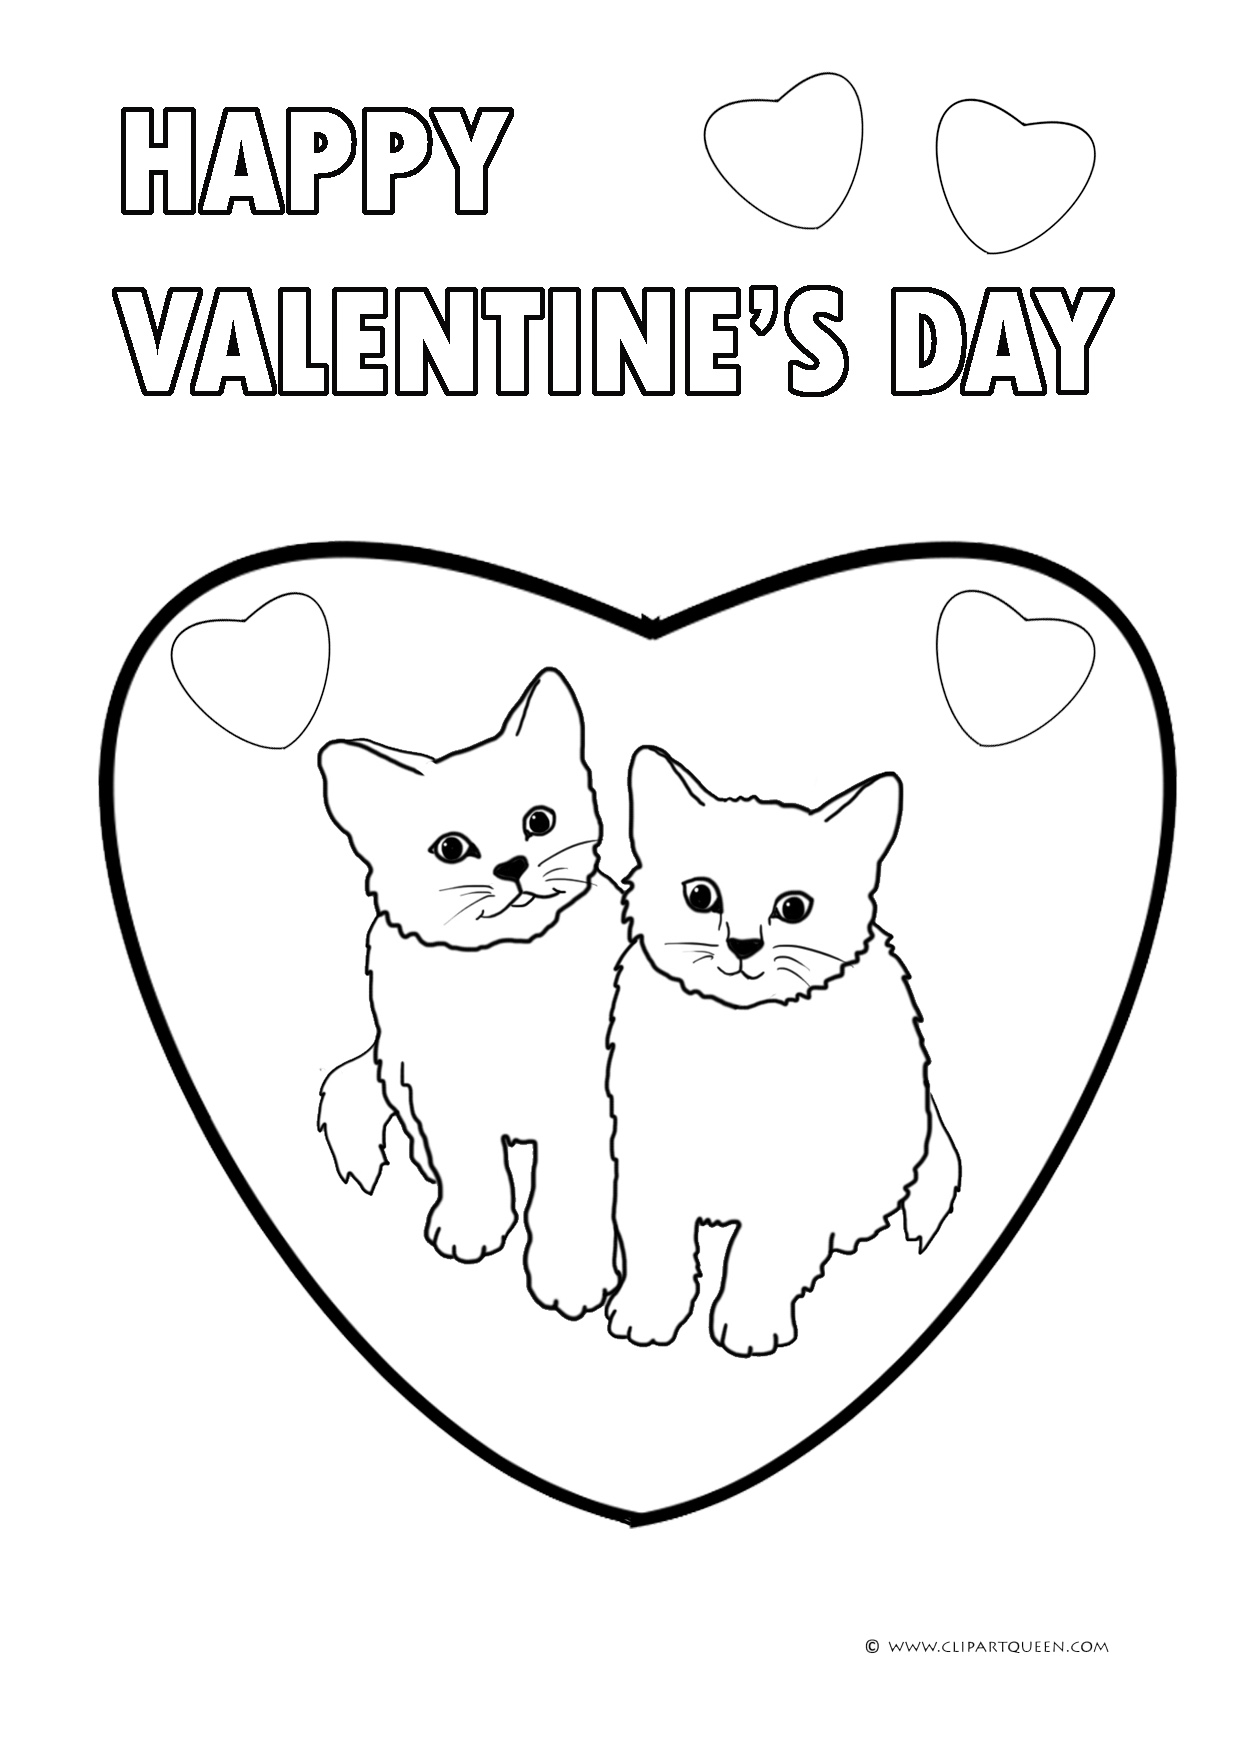 22-valentine-s-day-coloring-pages